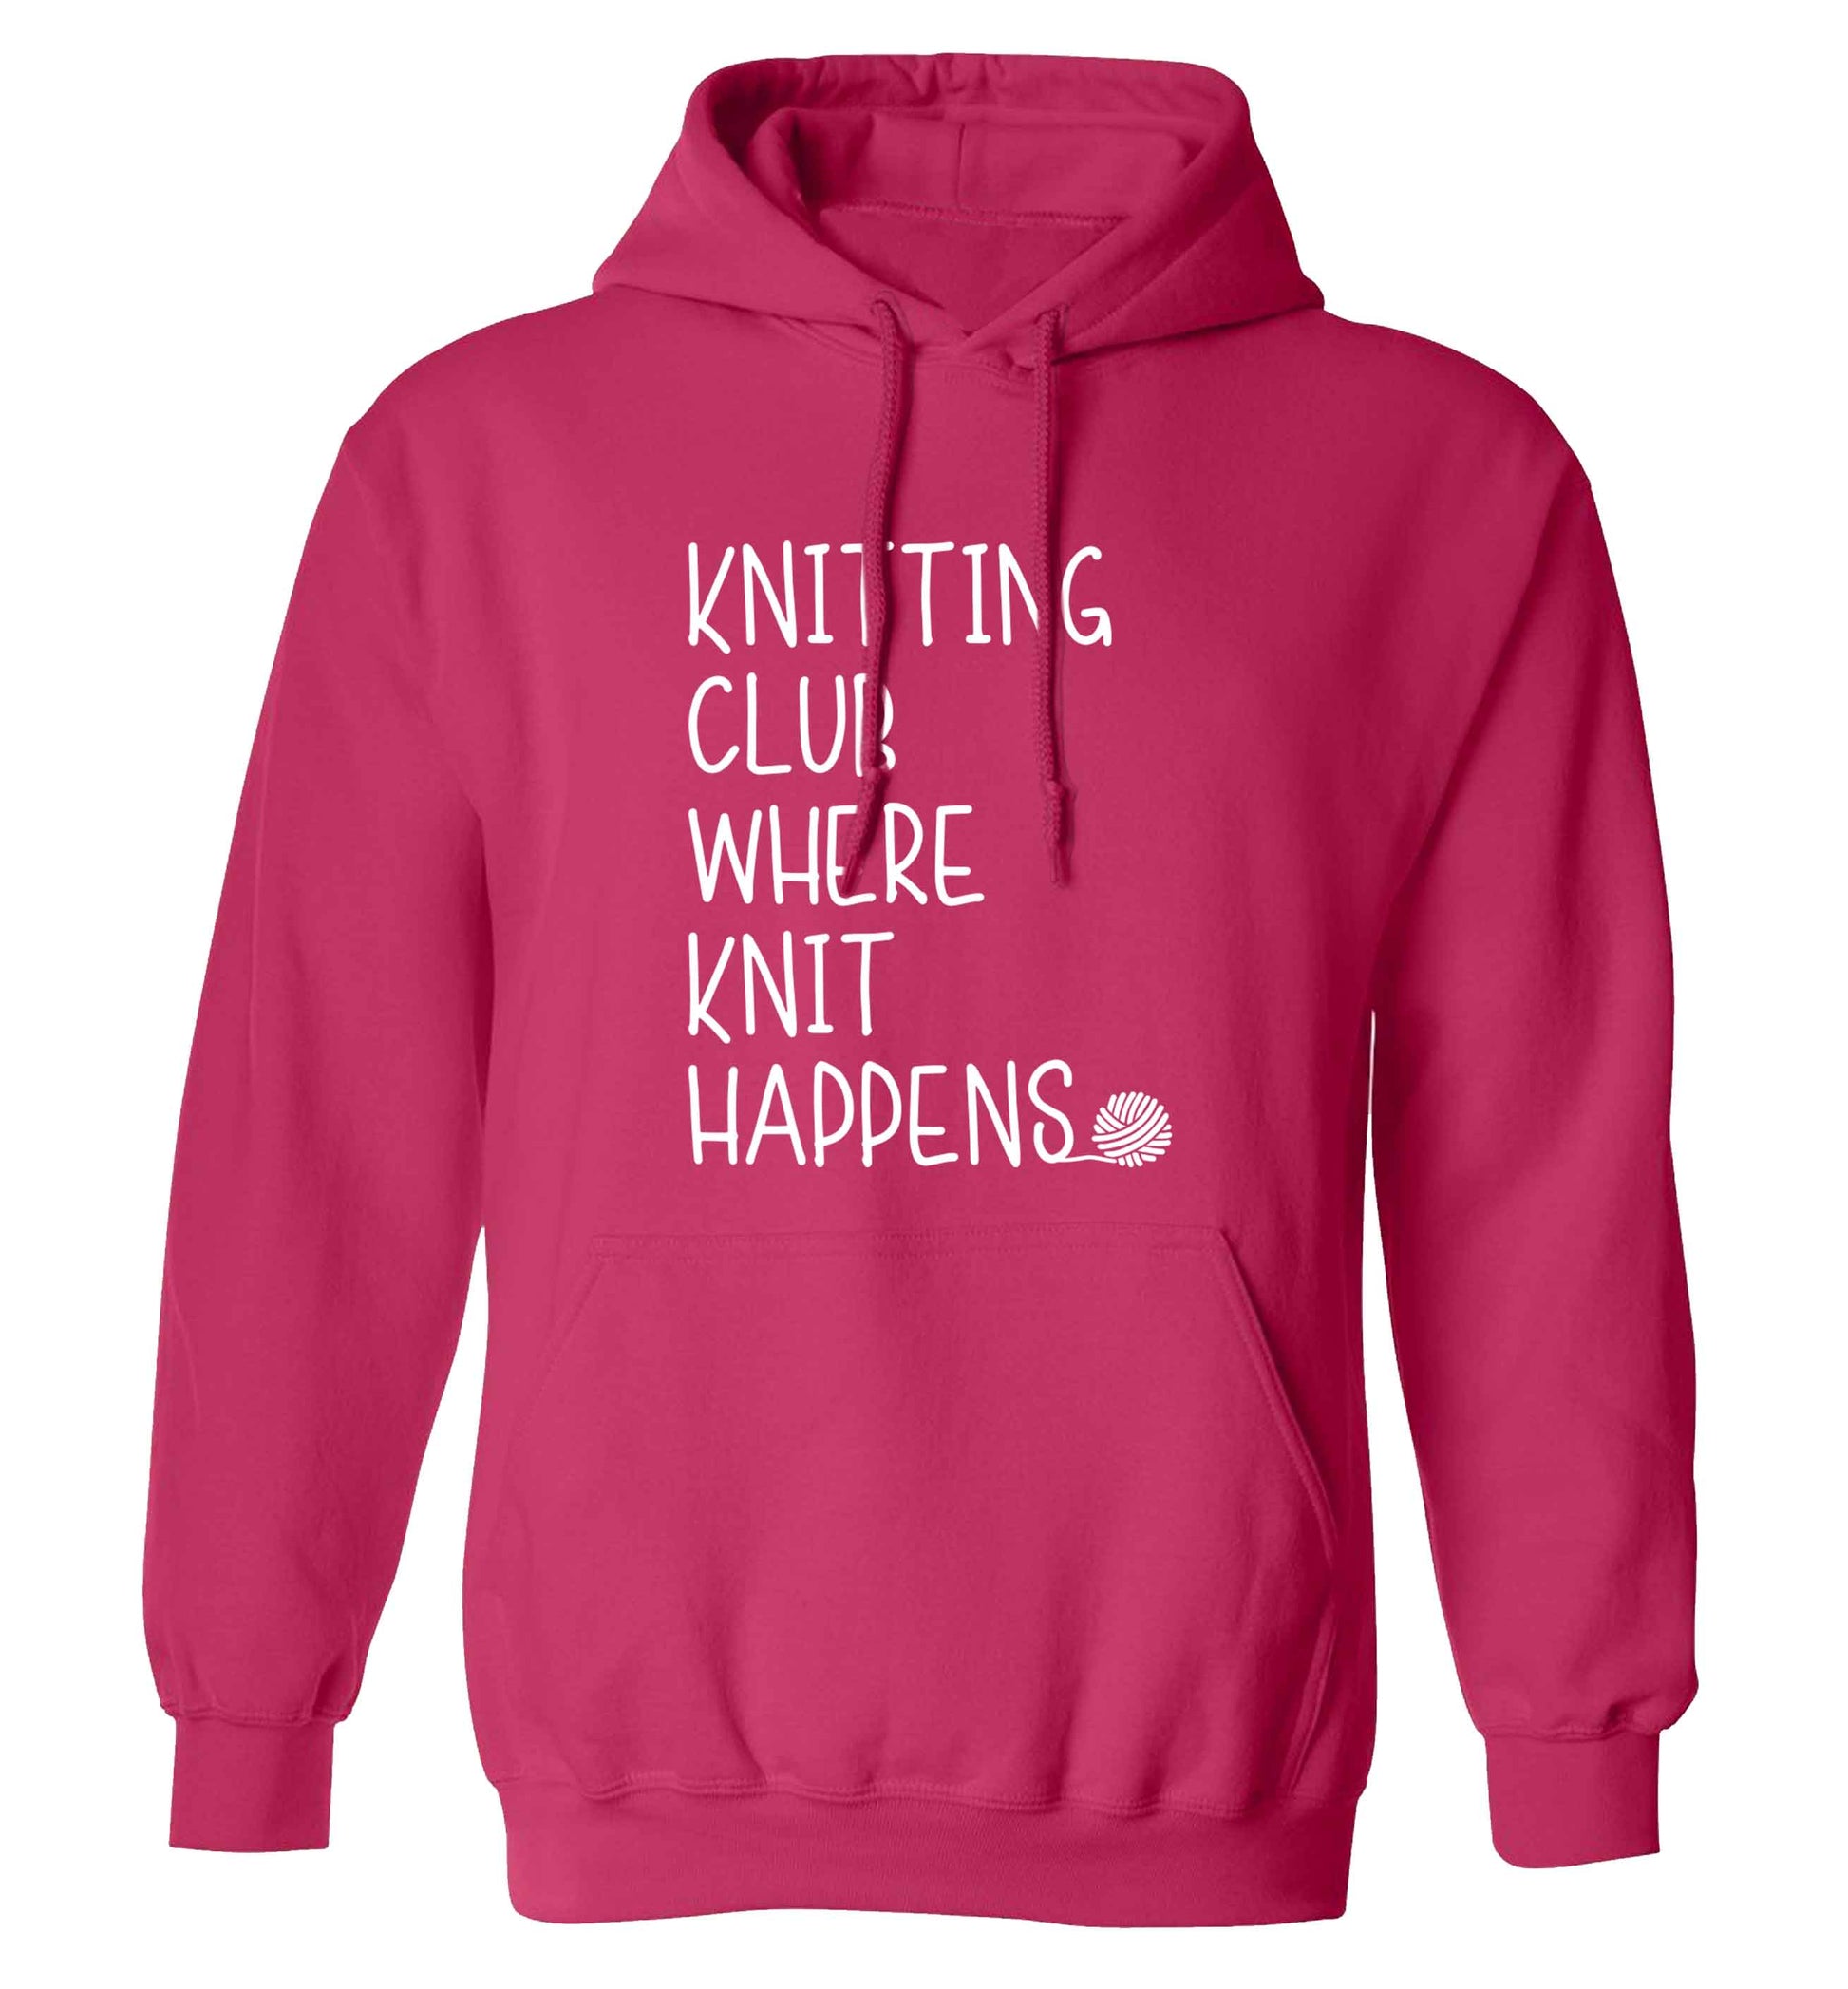 Knitting club where knit happens adults unisex pink hoodie 2XL